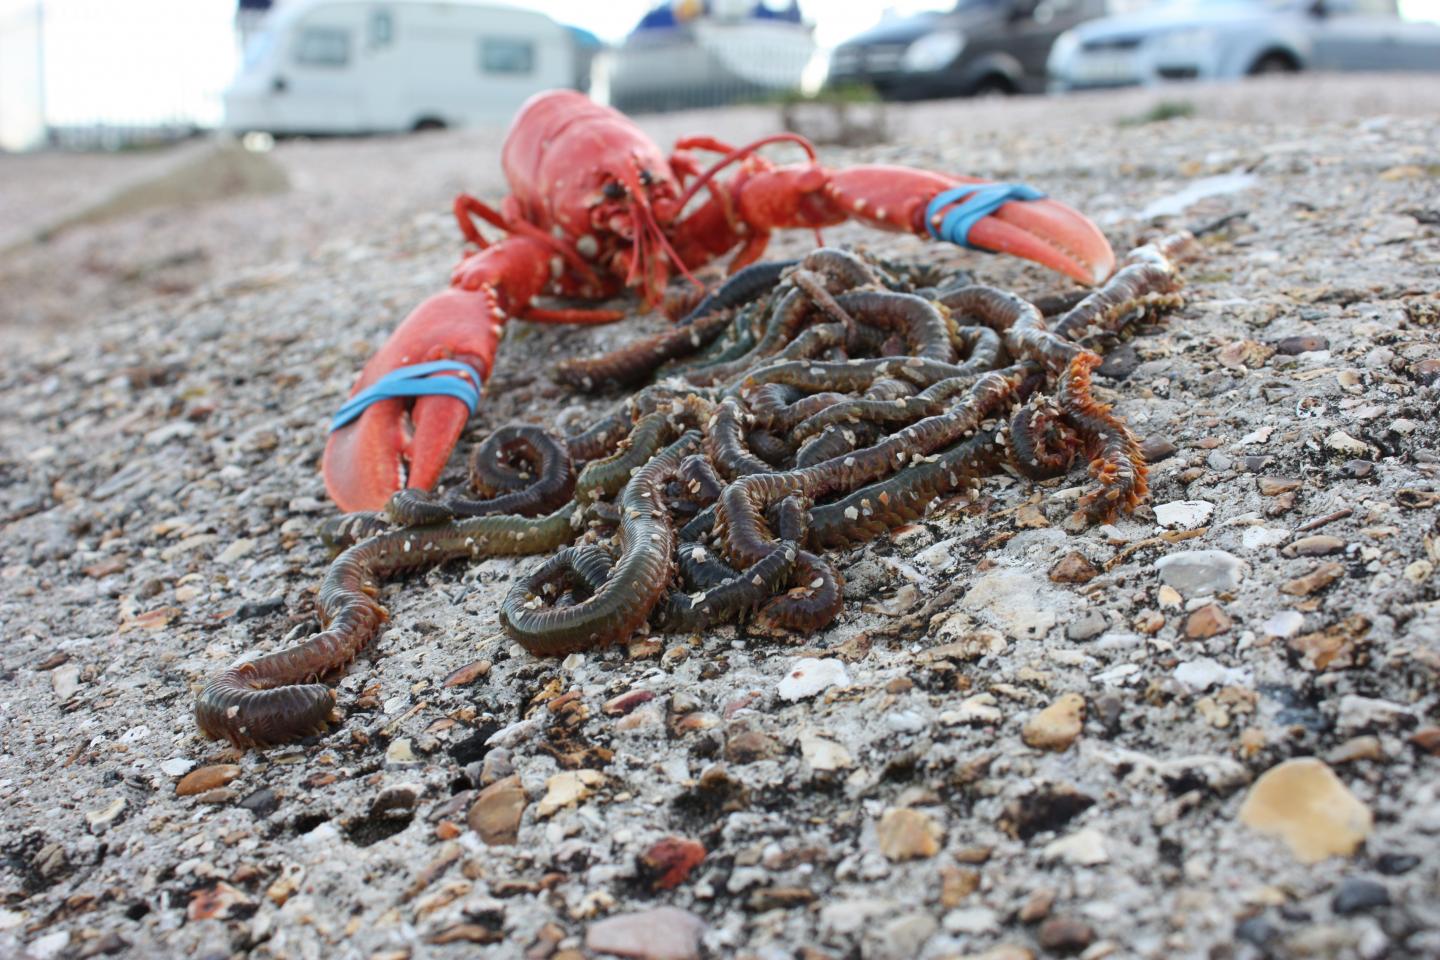 Gordon Watson: Lobster and Bait Worms